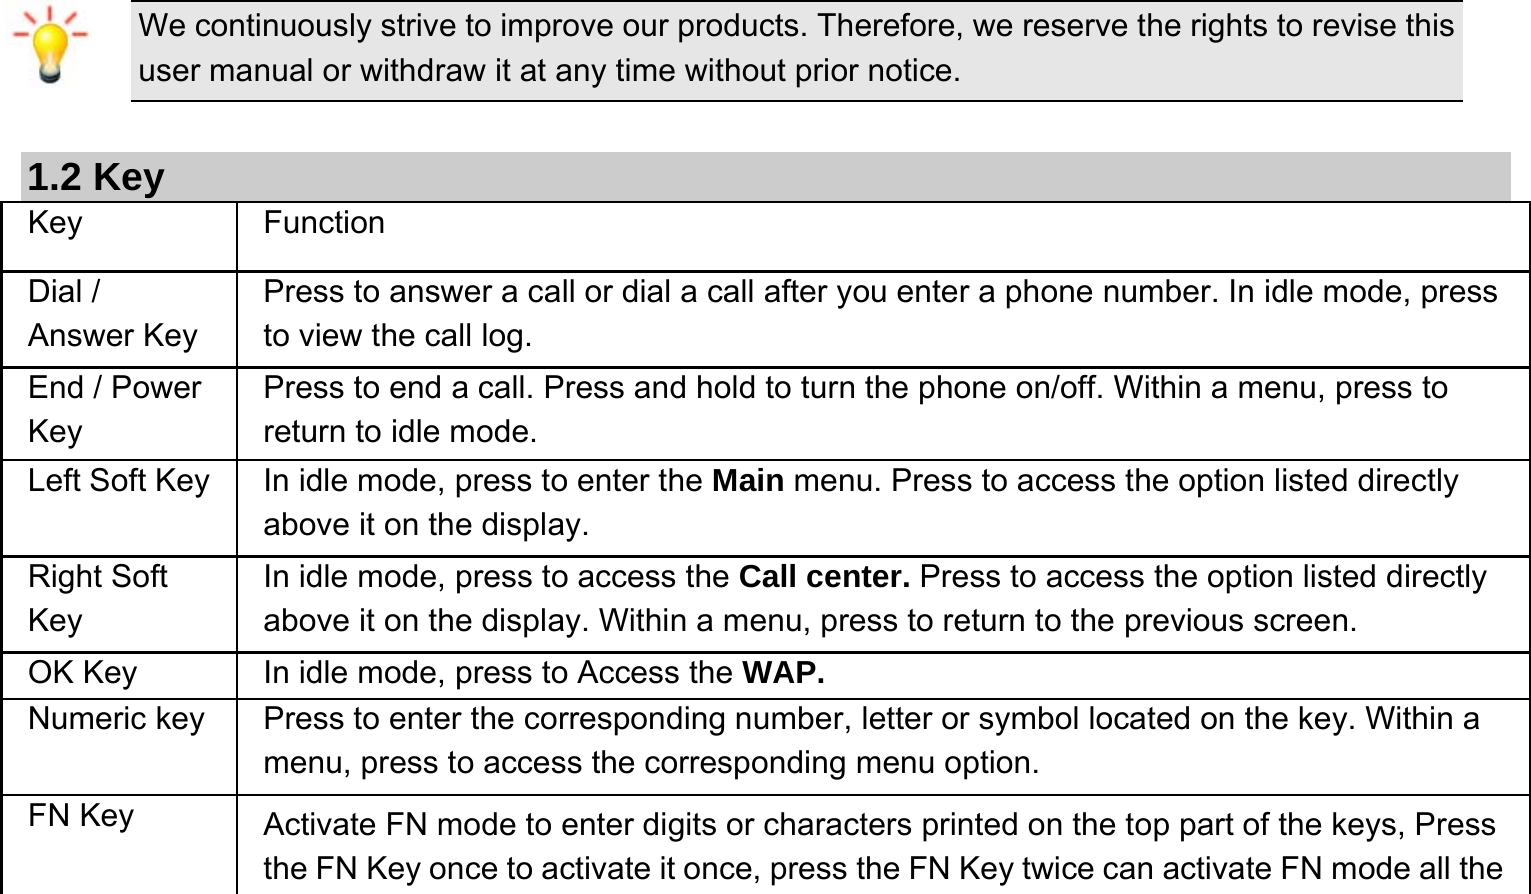   We continuously strive to improve our products. Therefore, we reserve the rights to revise this user manual or withdraw it at any time without prior notice.    1.2 Key Key Function  Dial / Answer Key Press to answer a call or dial a call after you enter a phone number. In idle mode, press to view the call log. End / Power Key Press to end a call. Press and hold to turn the phone on/off. Within a menu, press to return to idle mode. Left Soft Key In idle mode, press to enter the Main menu. Press to access the option listed directly above it on the display. Right Soft Key In idle mode, press to access the Call center. Press to access the option listed directly above it on the display. Within a menu, press to return to the previous screen.   OK Key  In idle mode, press to Access the WAP. Numeric key Press to enter the corresponding number, letter or symbol located on the key. Within a menu, press to access the corresponding menu option.   FN Key  Activate FN mode to enter digits or characters printed on the top part of the keys, Press the FN Key once to activate it once, press the FN Key twice can activate FN mode all the 